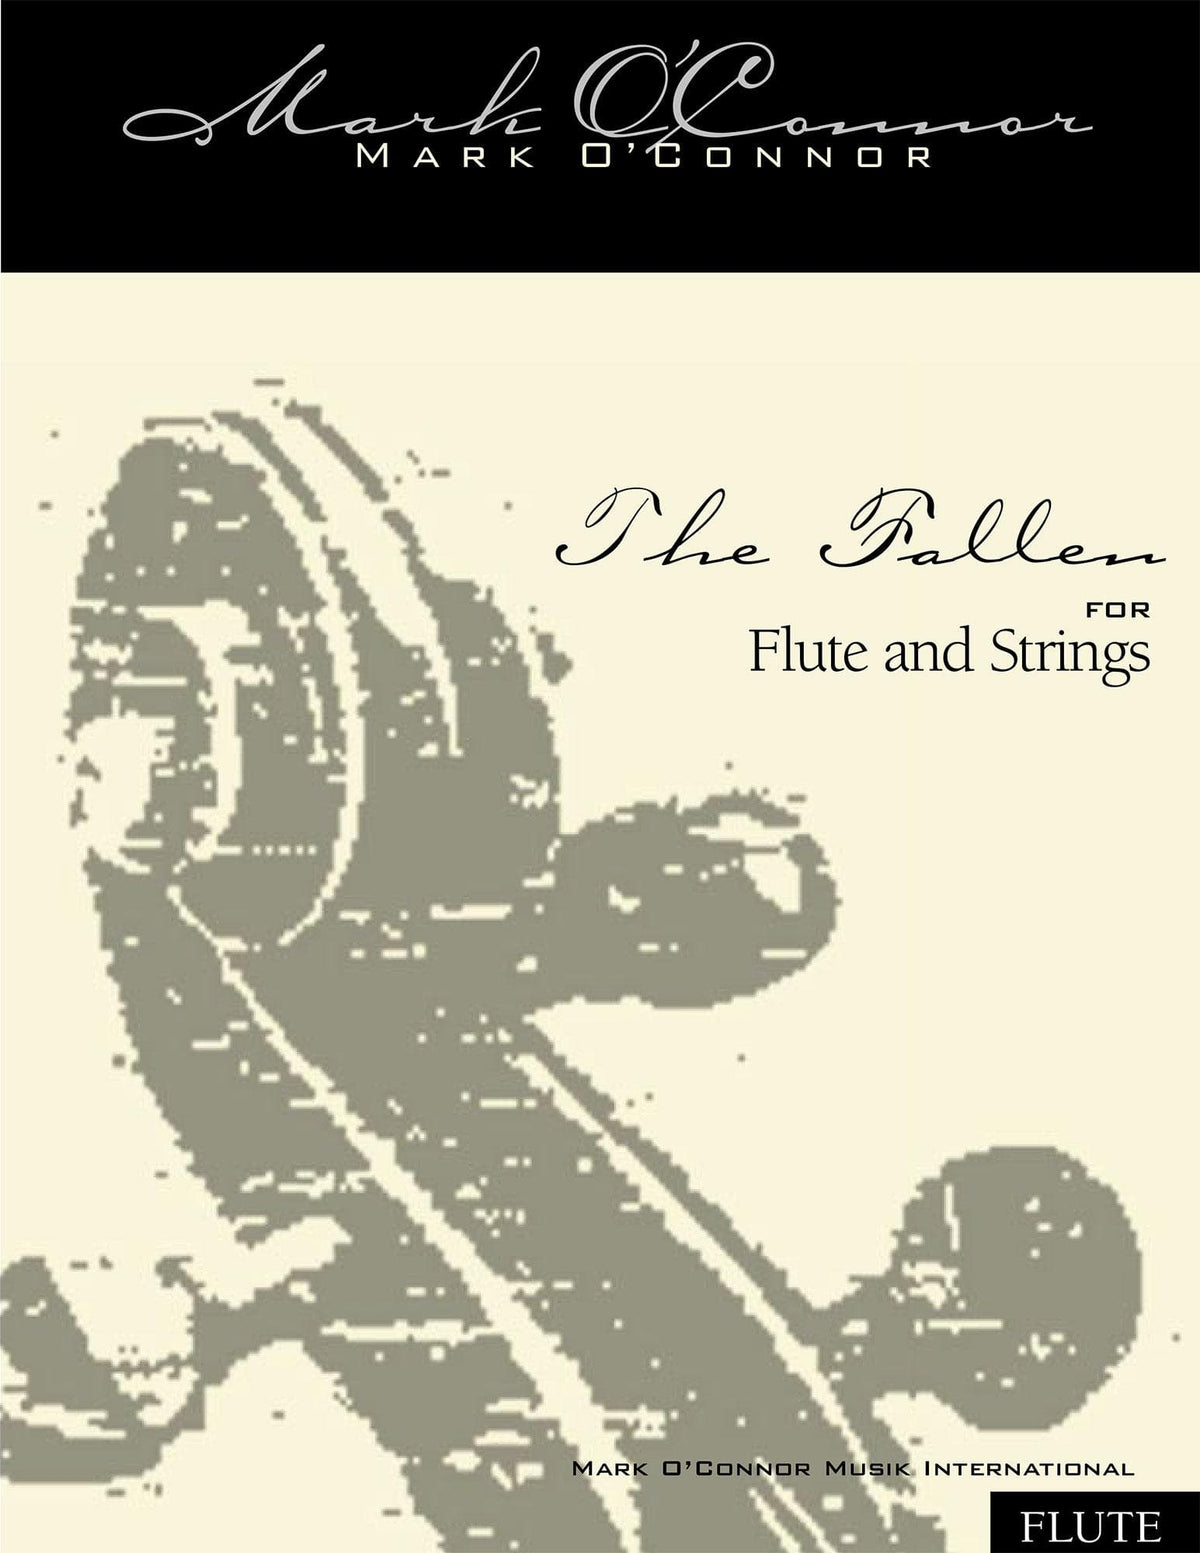 O'Connor, Mark - The Fallen for Flute and Strings - Flute Solo - Digital Download